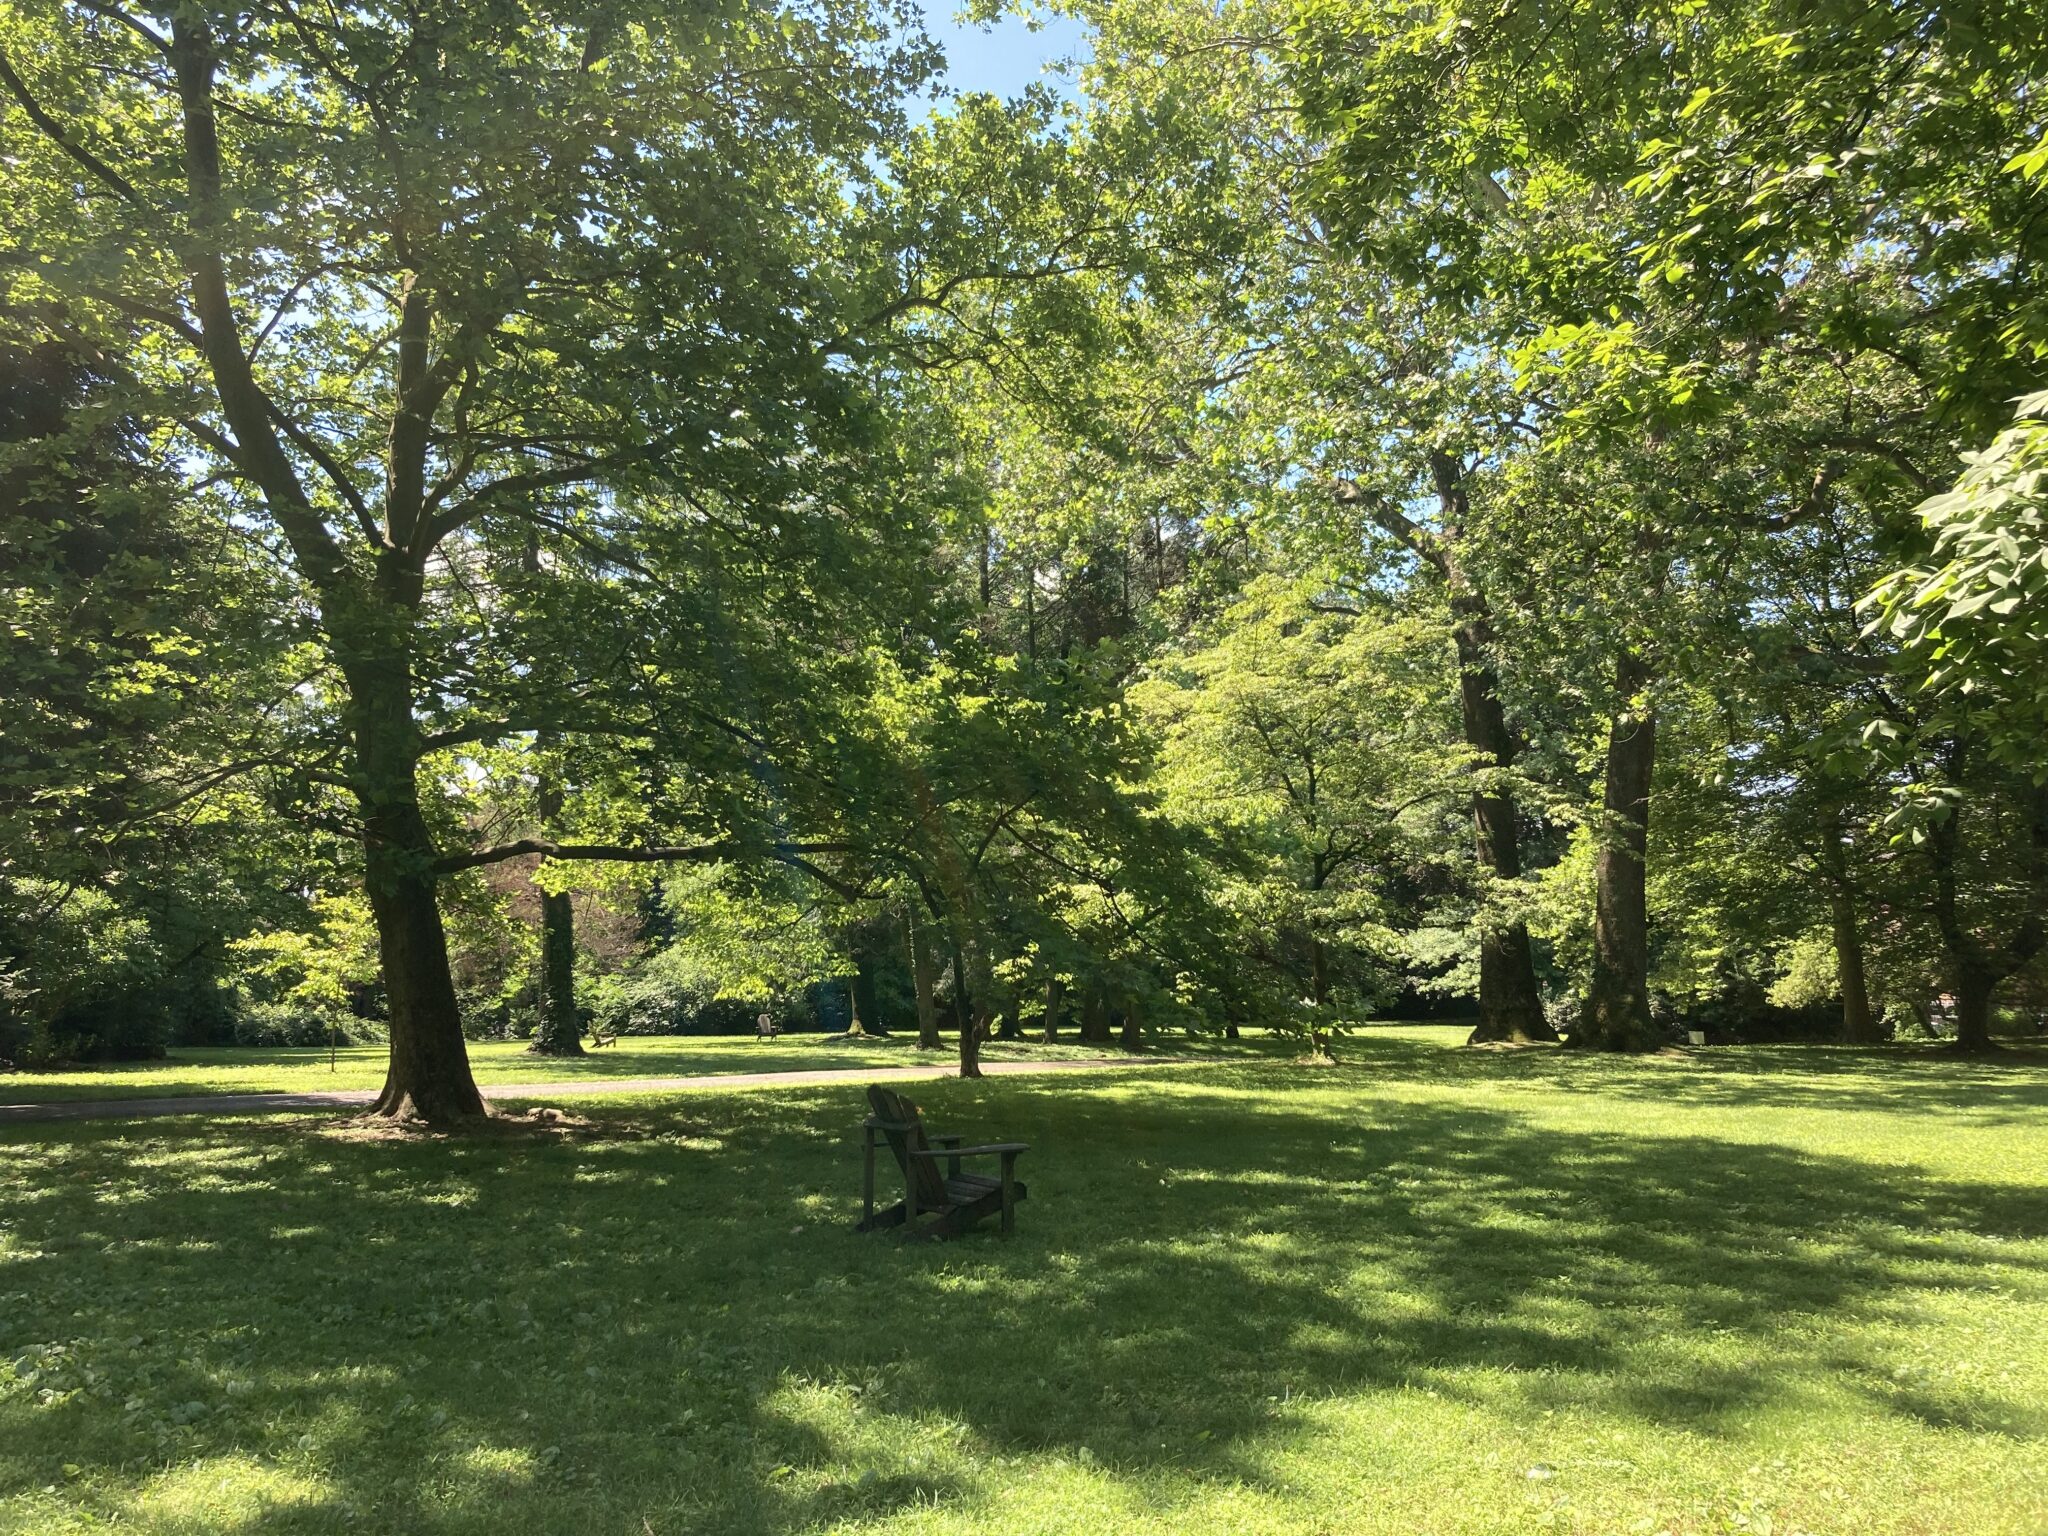 Cliveden's grounds open for Juneteenth